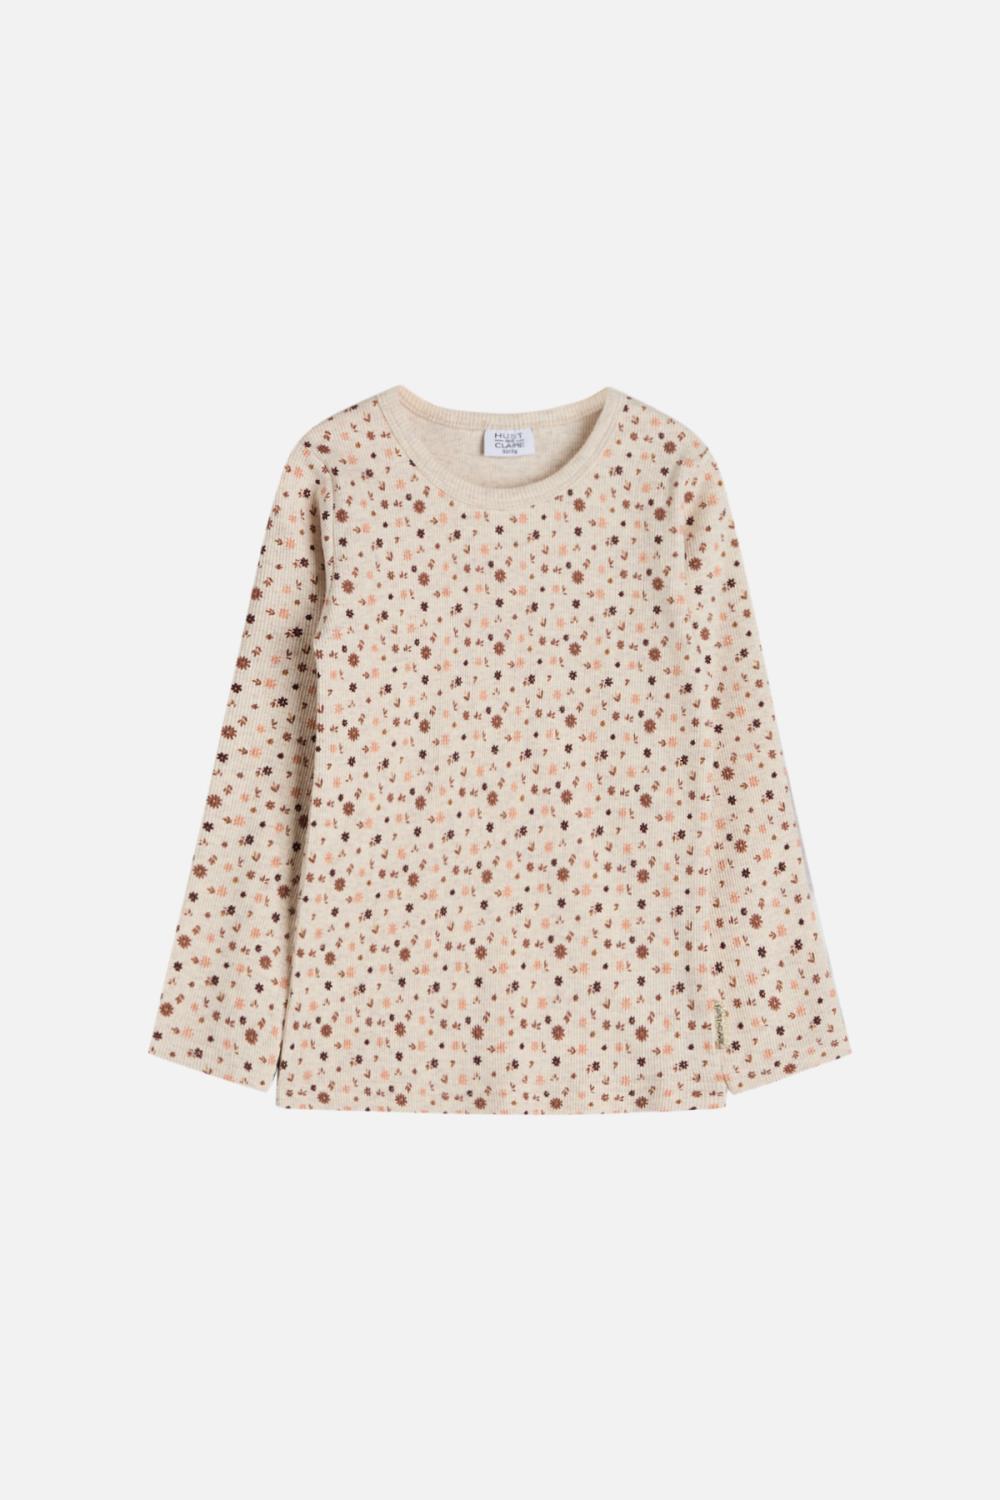 Hust&claire Alanis Top - Wheat